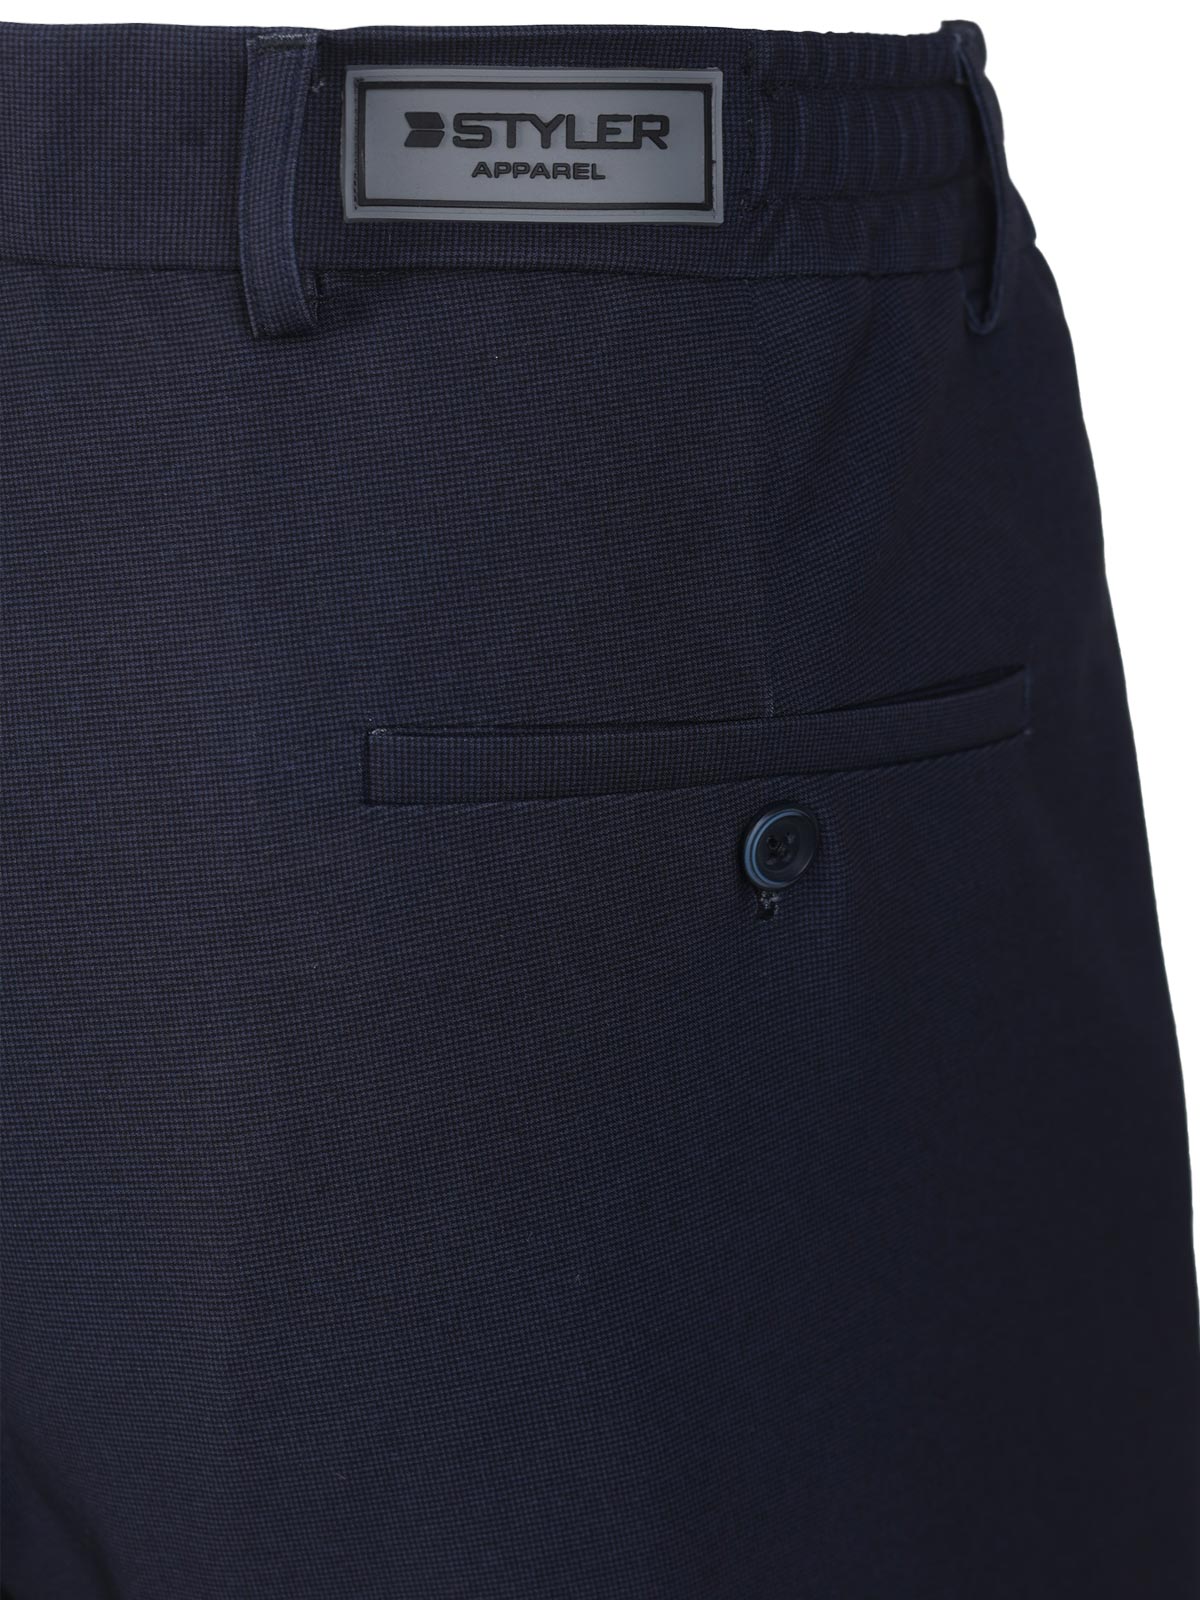 Pants in dark blue with laces - 29013 € 55.12 img3